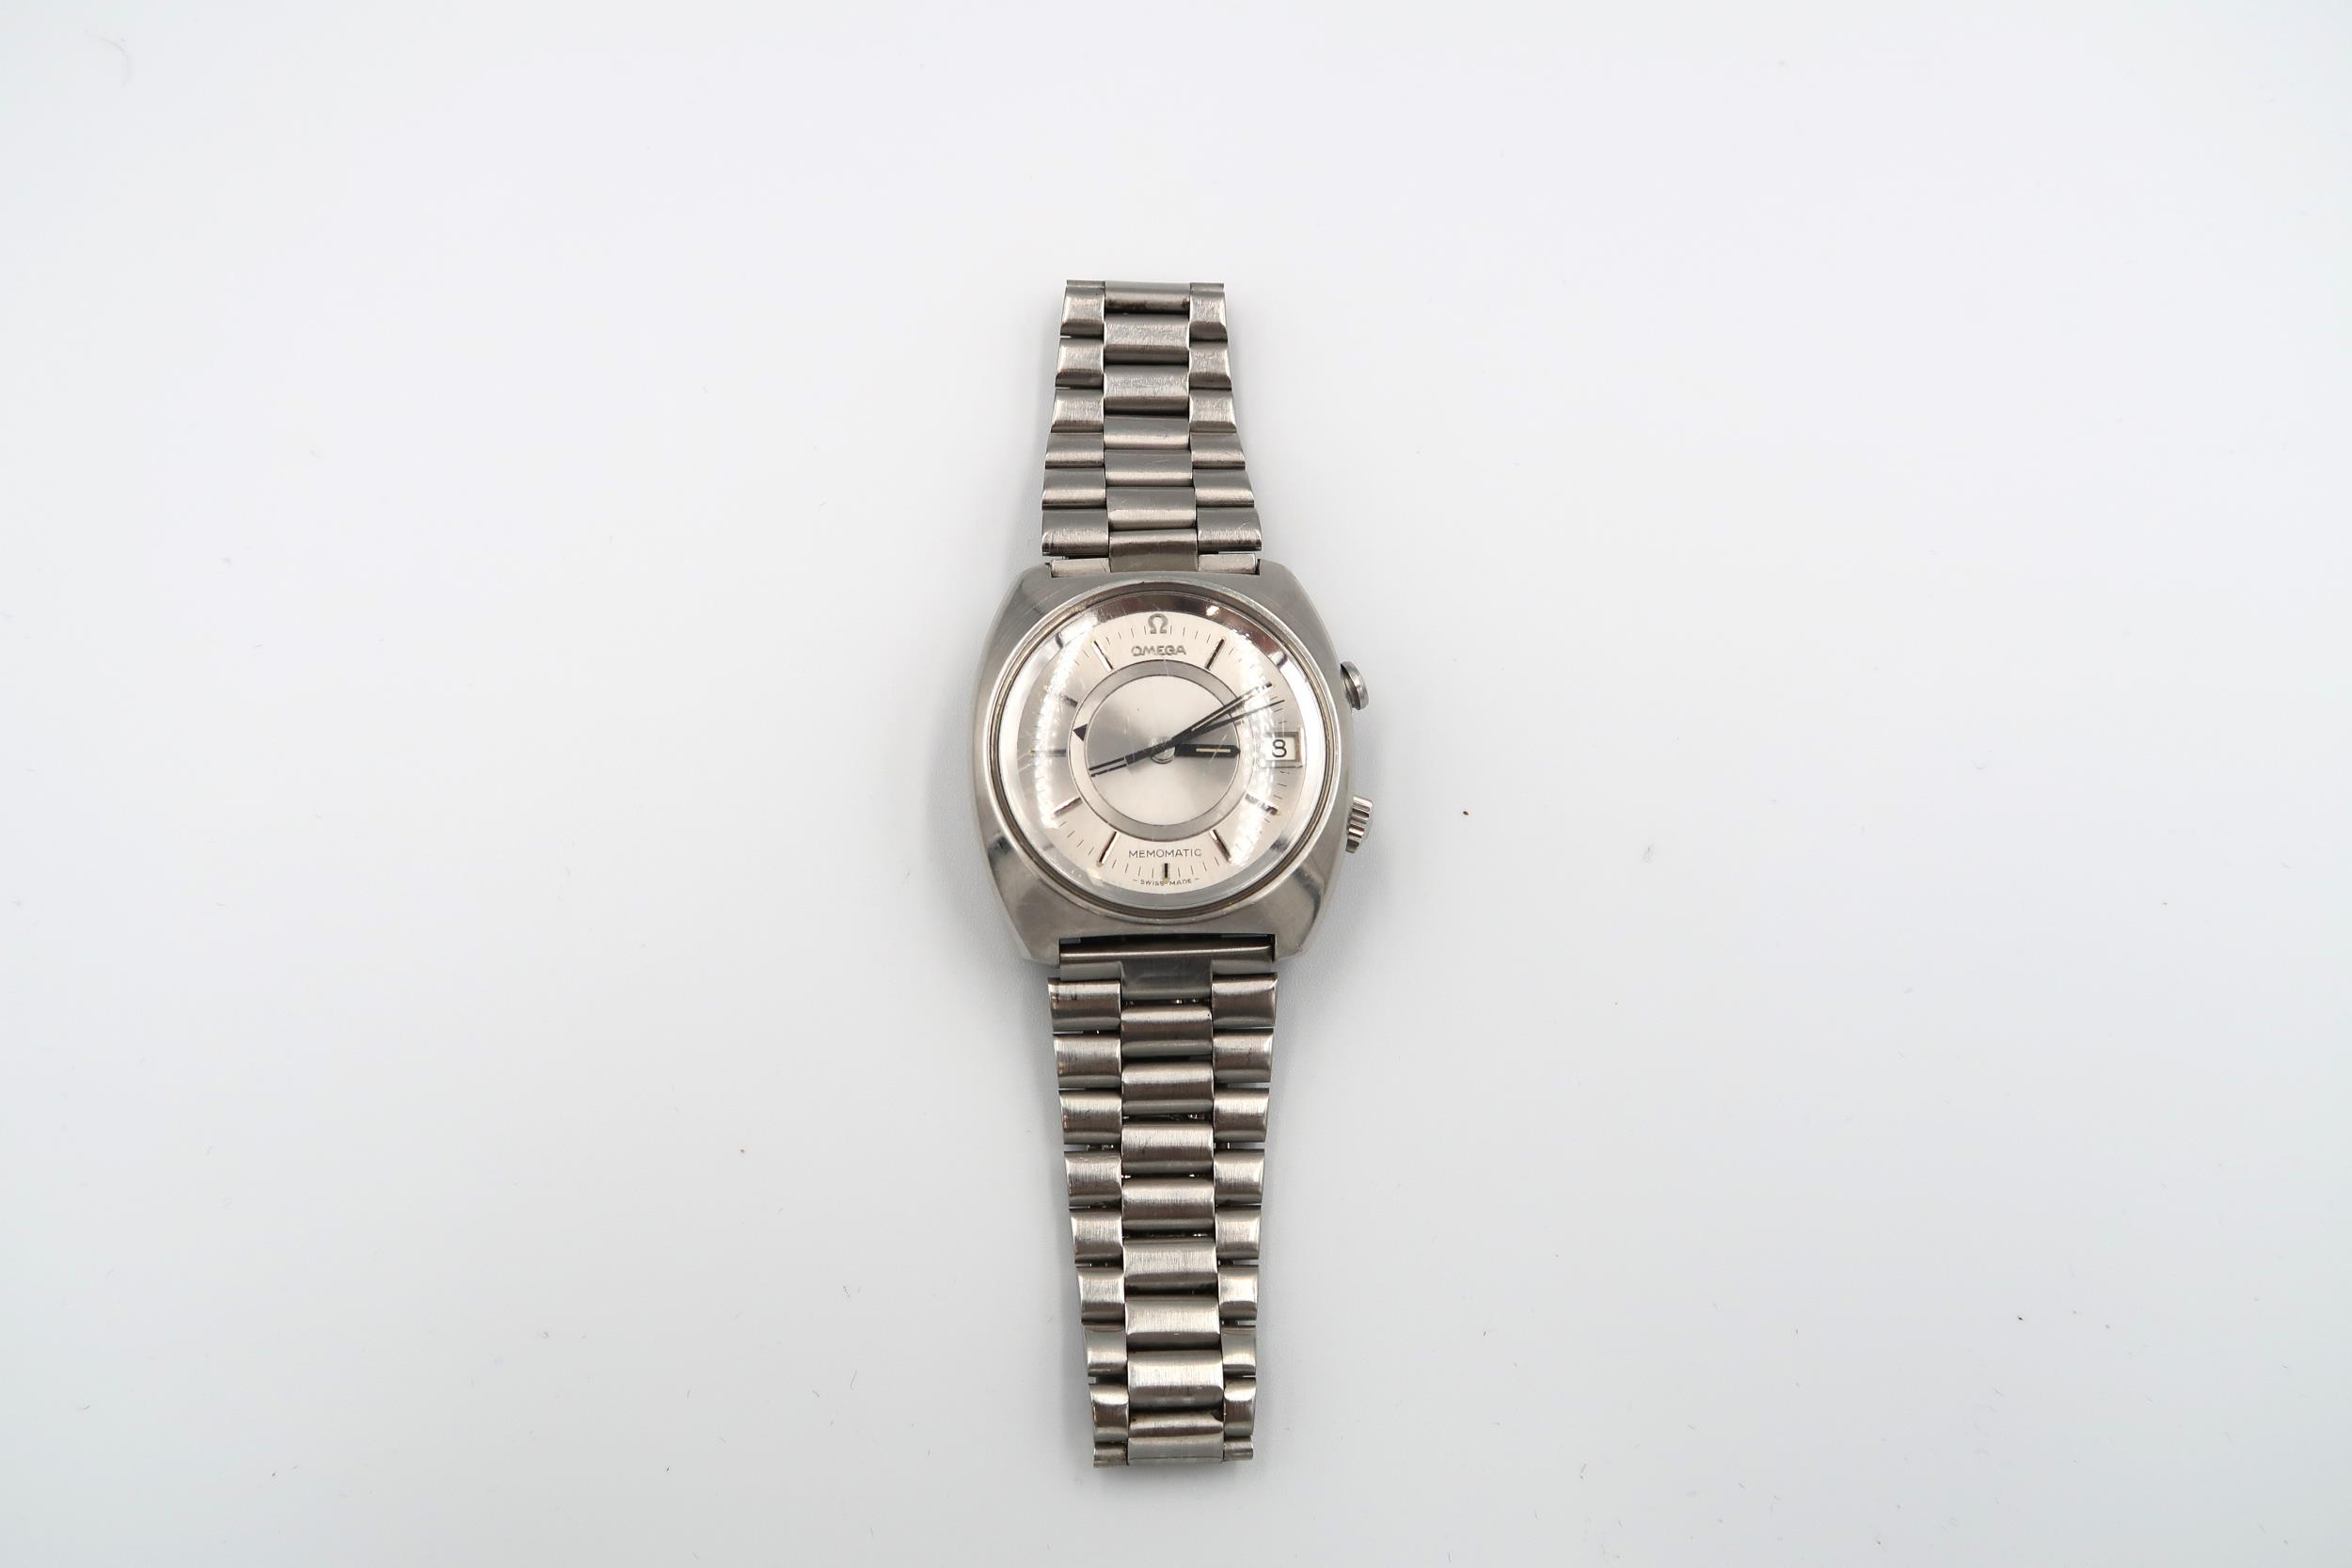 A gents Omega Seamaster Memomatic bracelet wristwatch, early 1970's - running in the saleroom